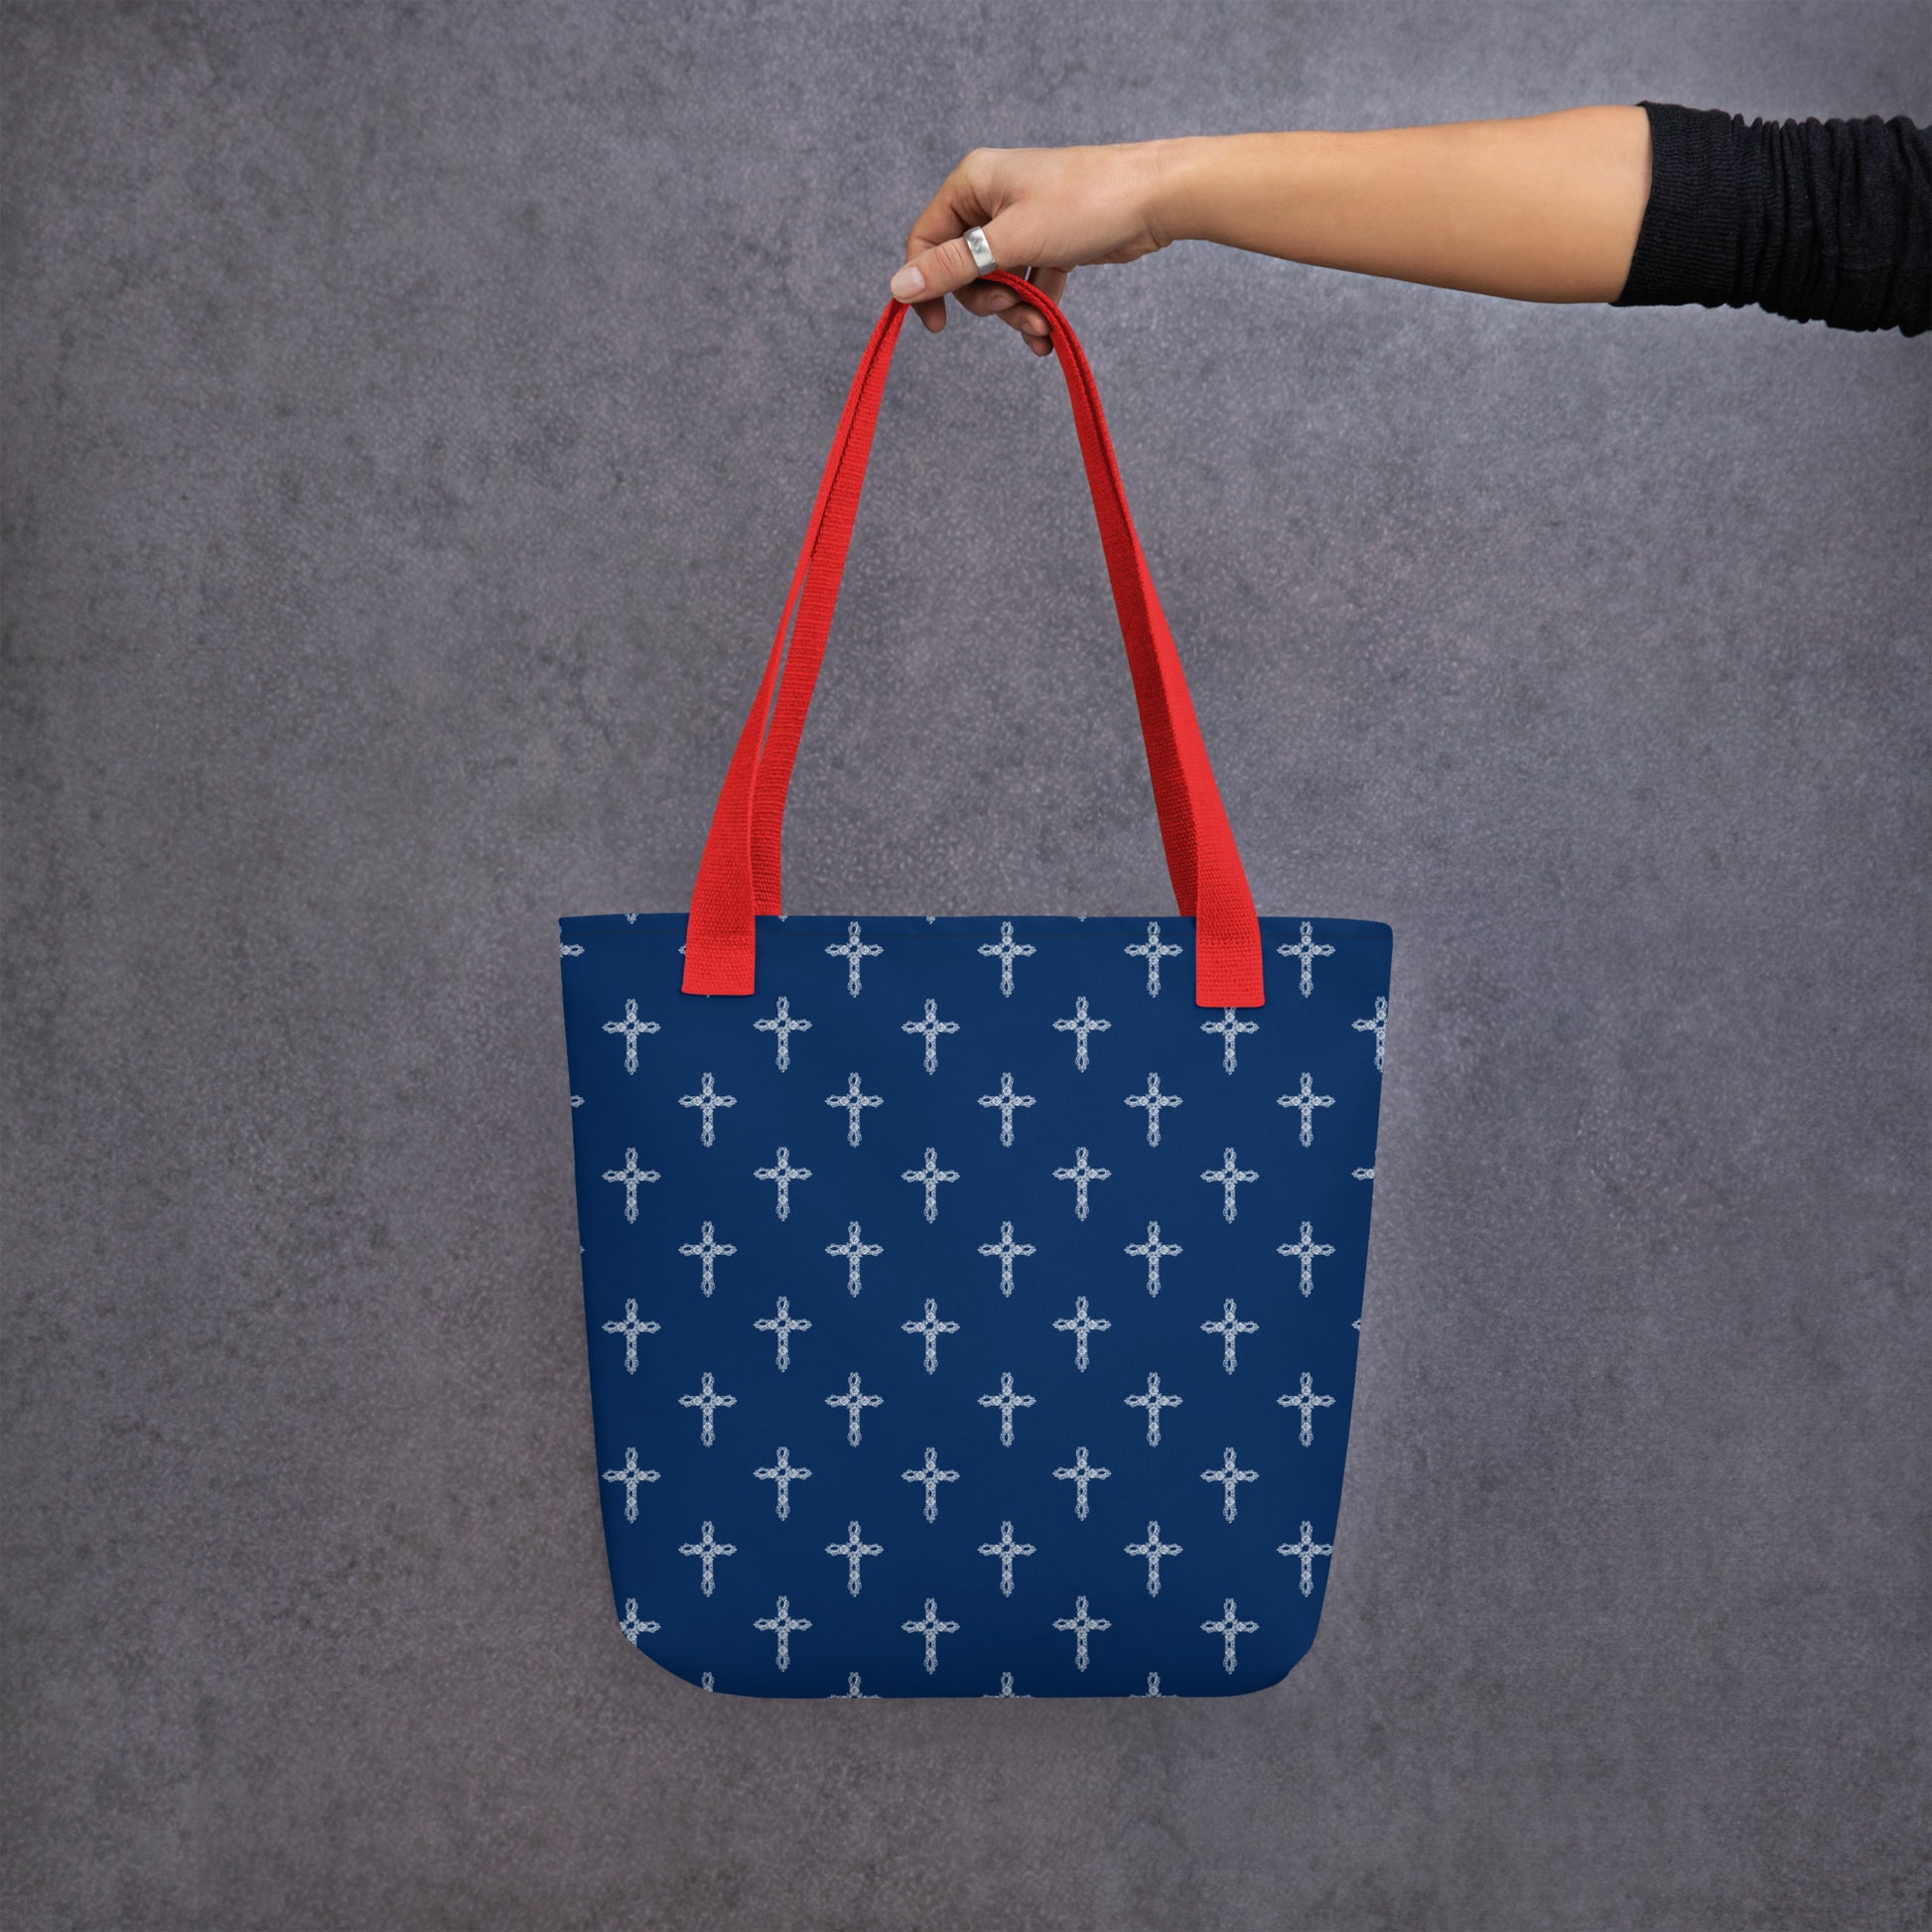 Woman's arm with hand holding the red handle of a navy purse or tote bag with white crosses on it against a neutral gray background.